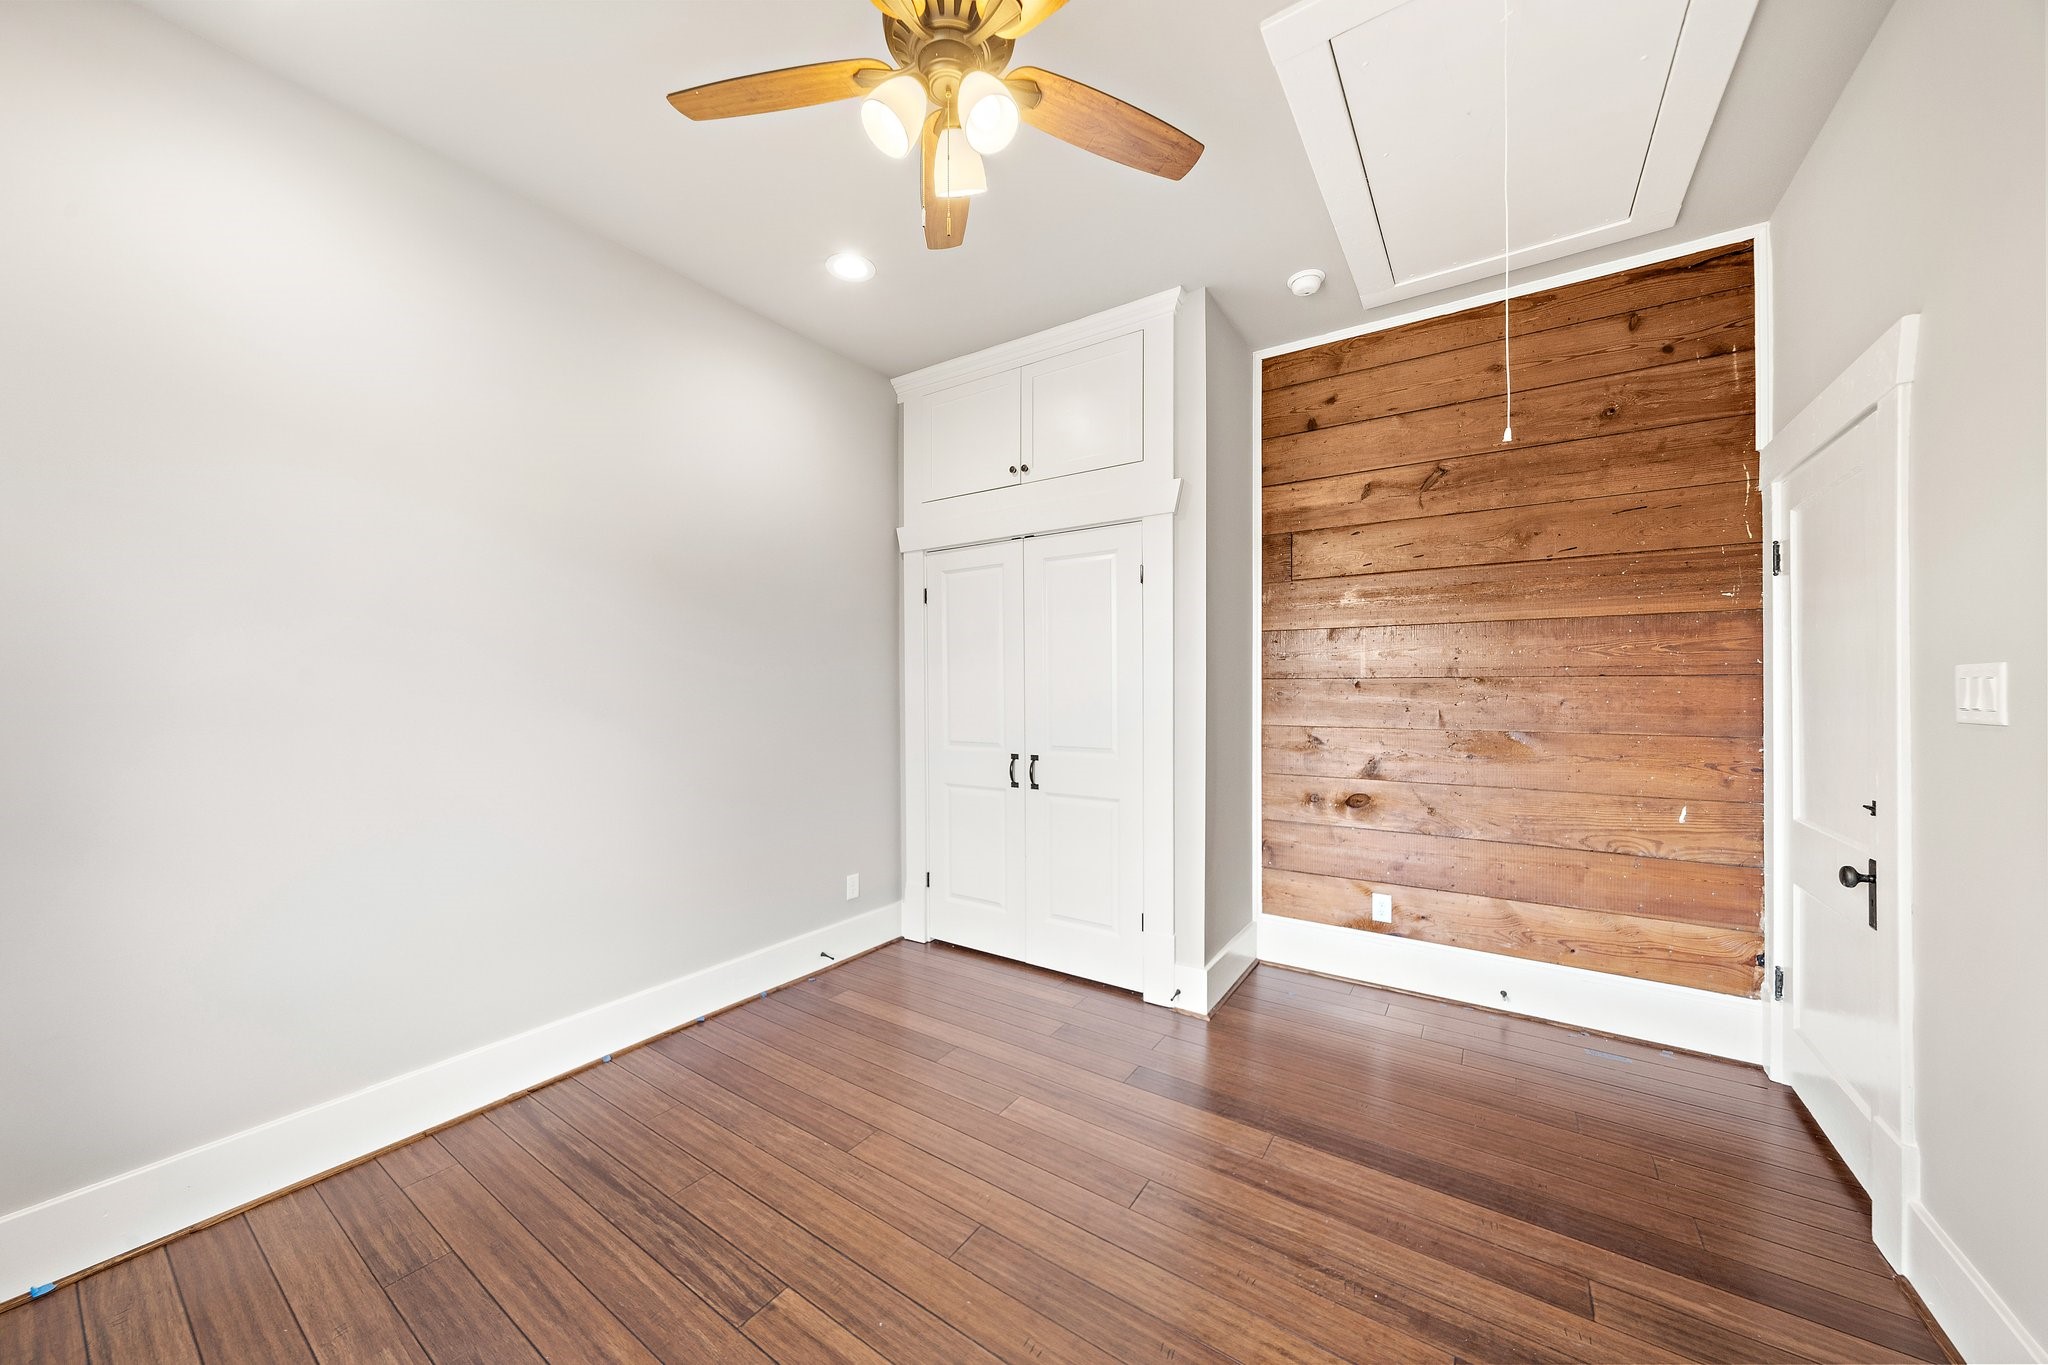 Double door storage and custom built cabinets to the ceiling! Exposed shiplap wall!